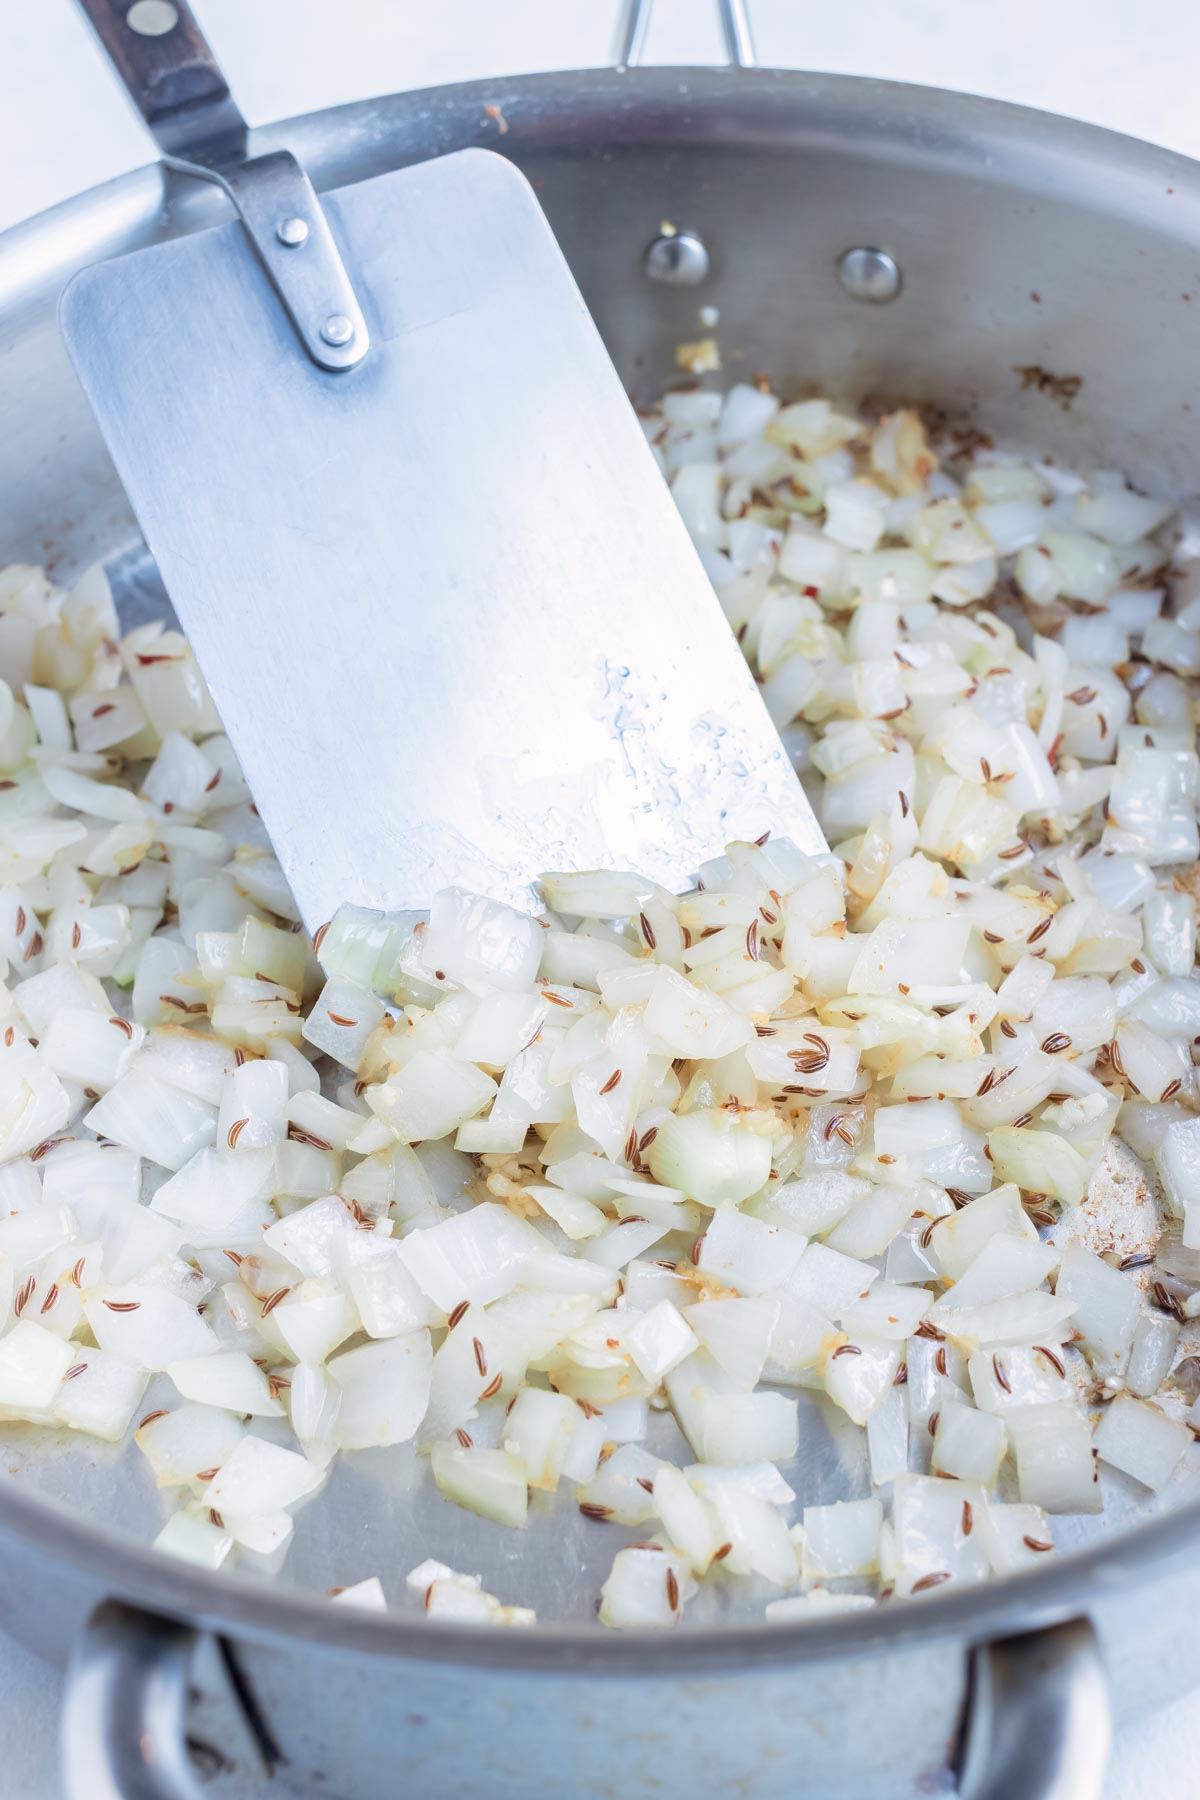 Diced onion is sautéed on the oven in a pan.